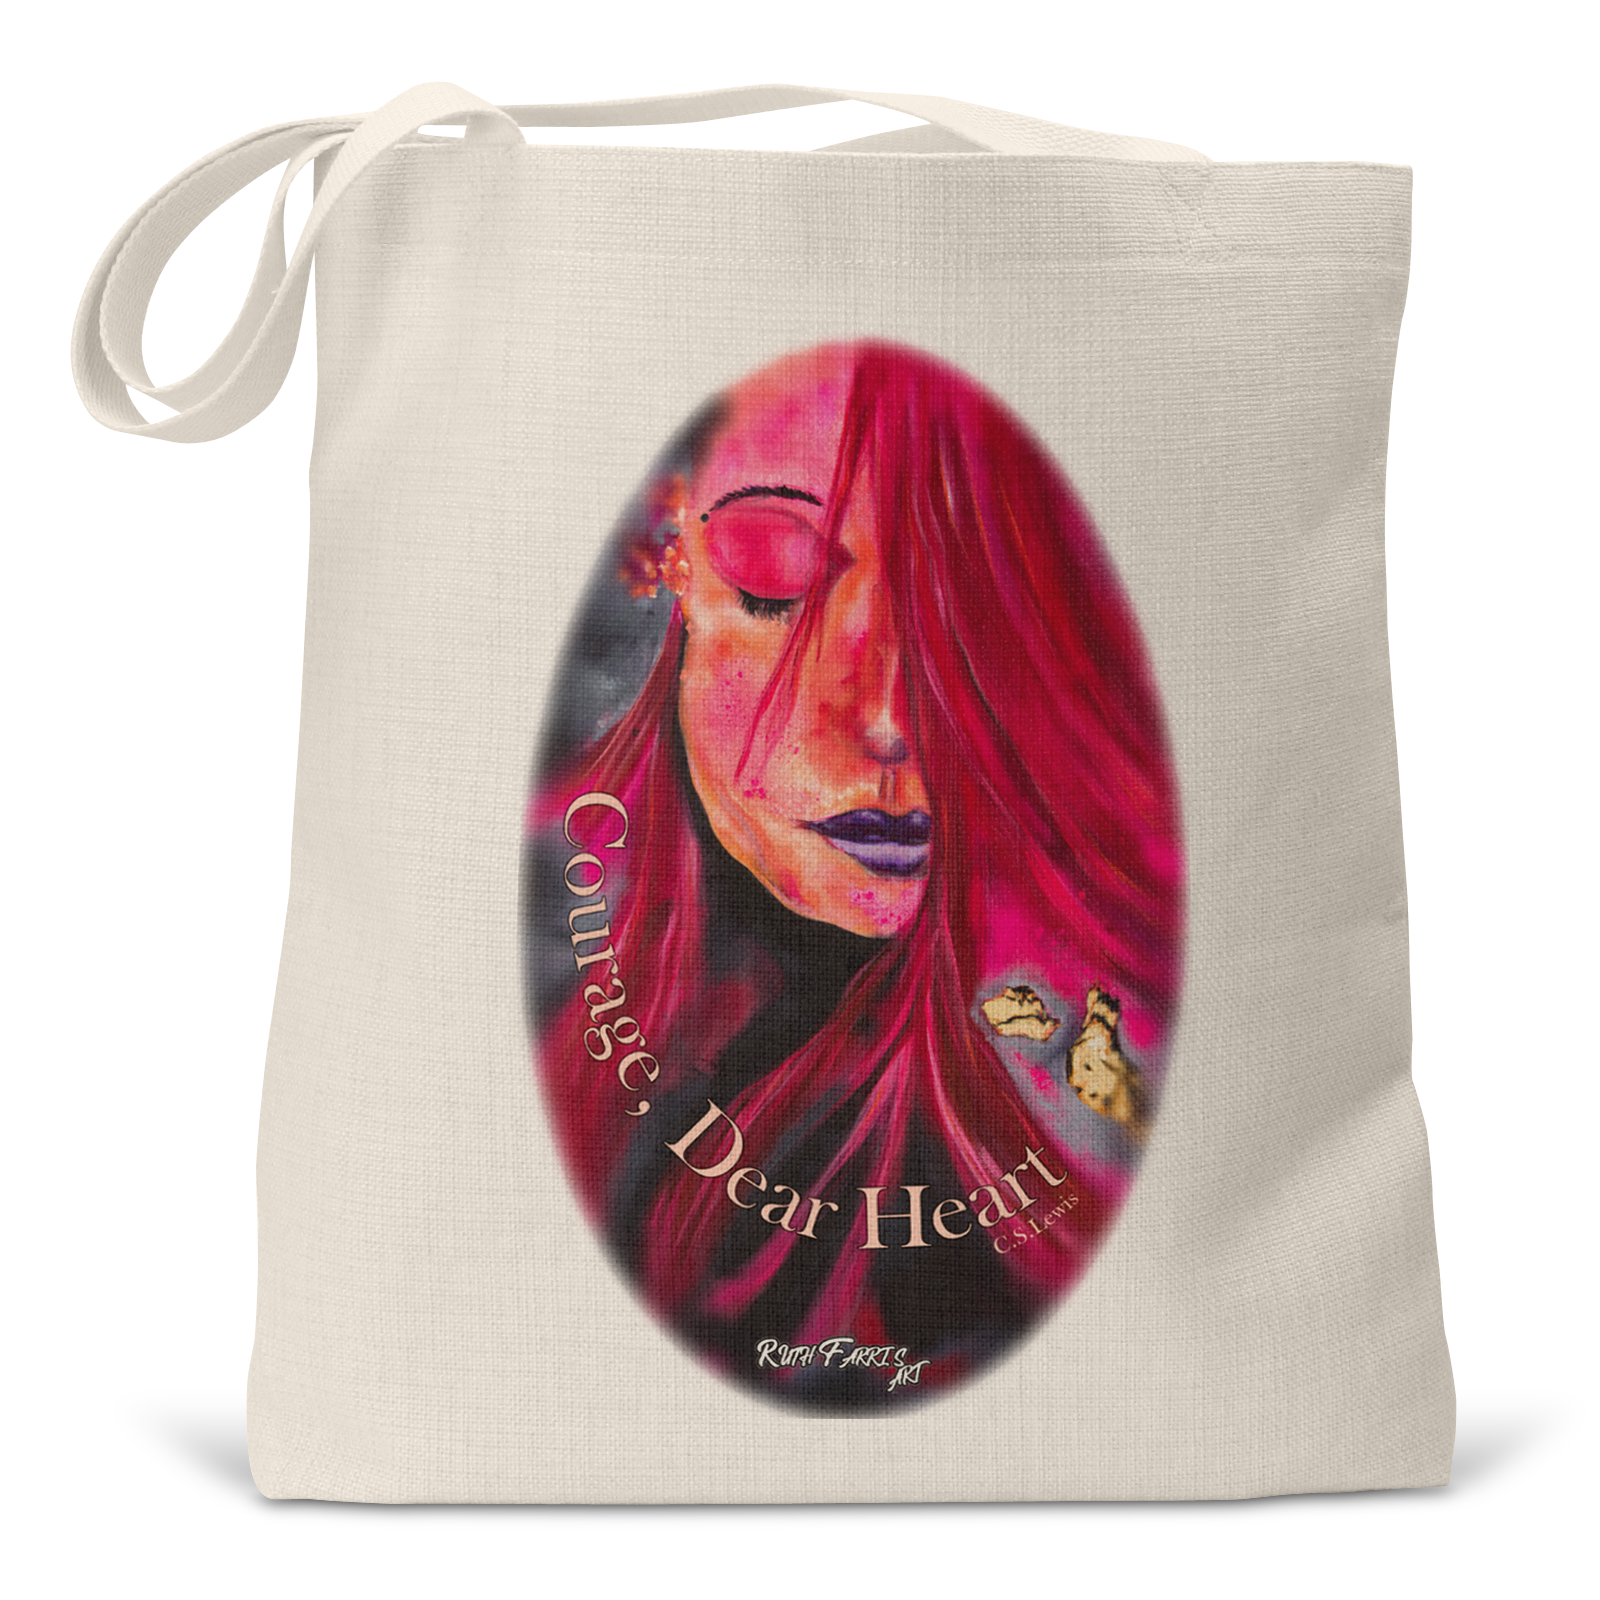 "Sunset Woman" - Small/Large Tote Bag